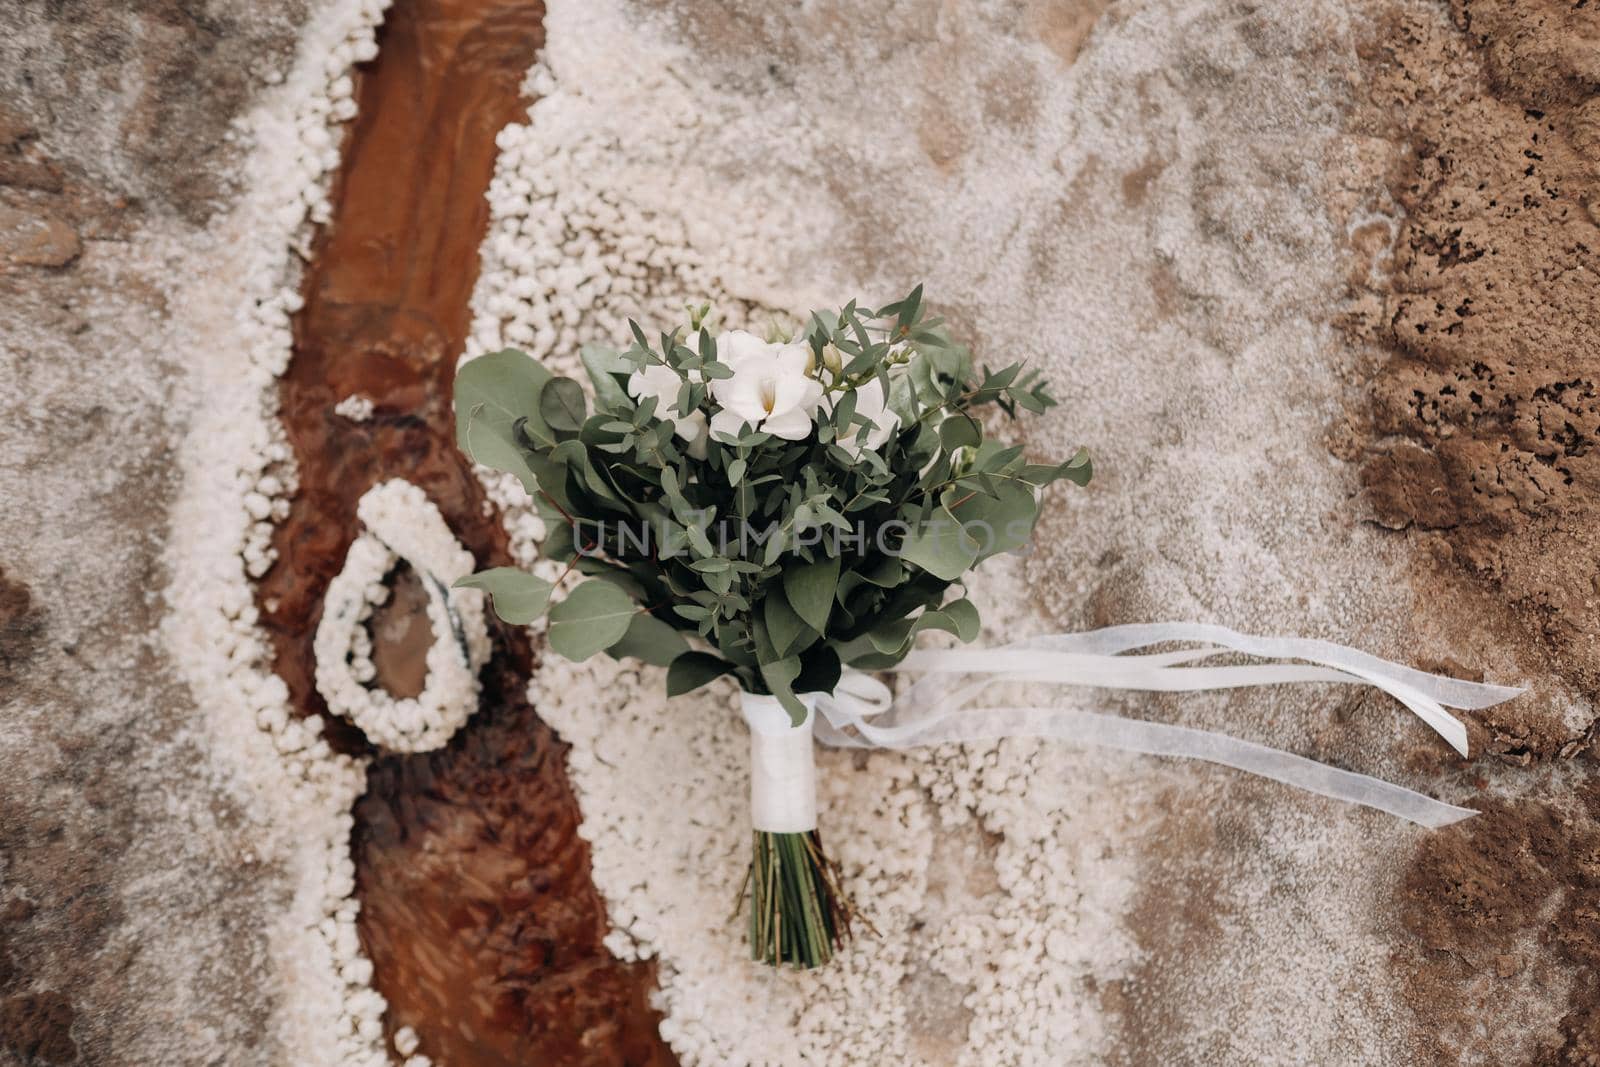 the wedding bouquet rests on a salty texture.The decor at the wedding.